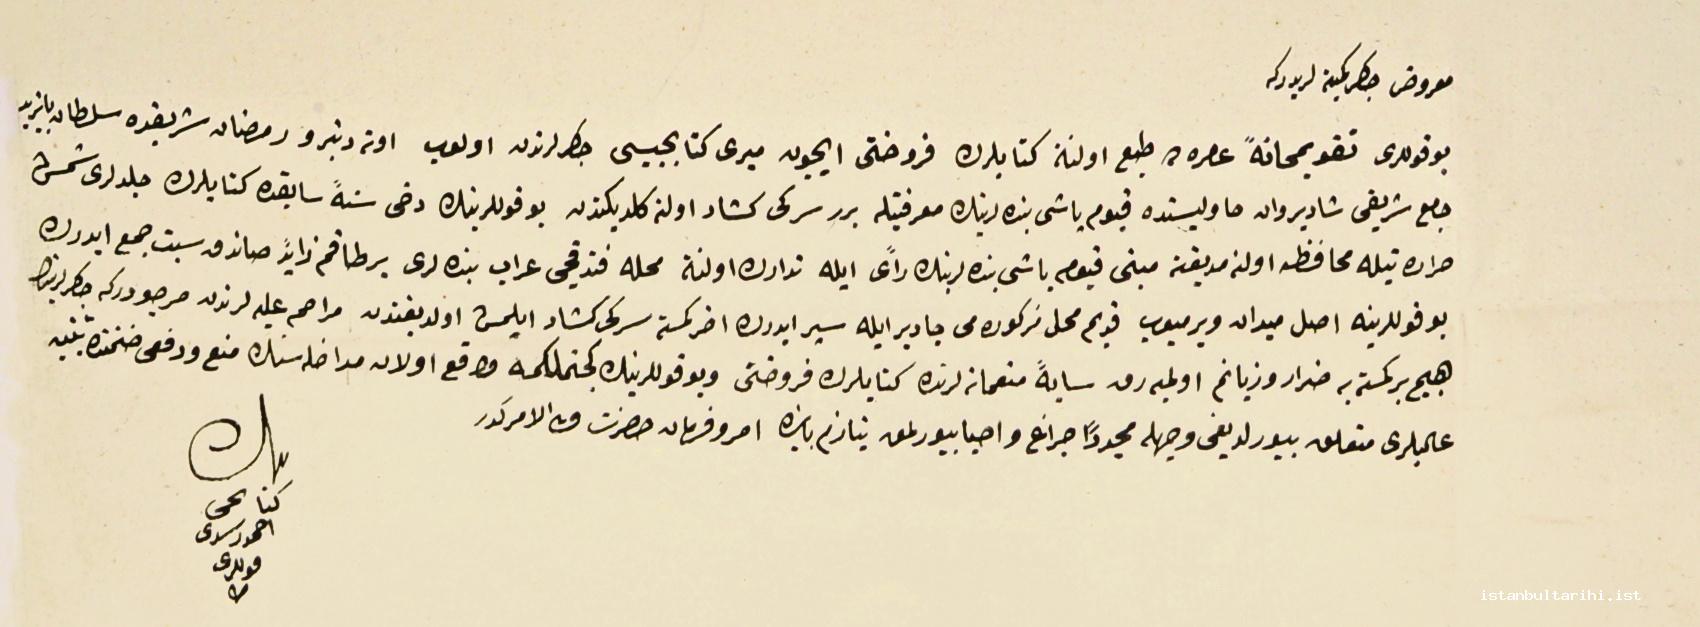 3- The bookseller Ahmed Efendi’s petition dated 18 August 1848 about opening a  book exhibition in the yard of Beyazıt Mosque (BOA, A. MKT, no. 144/38)